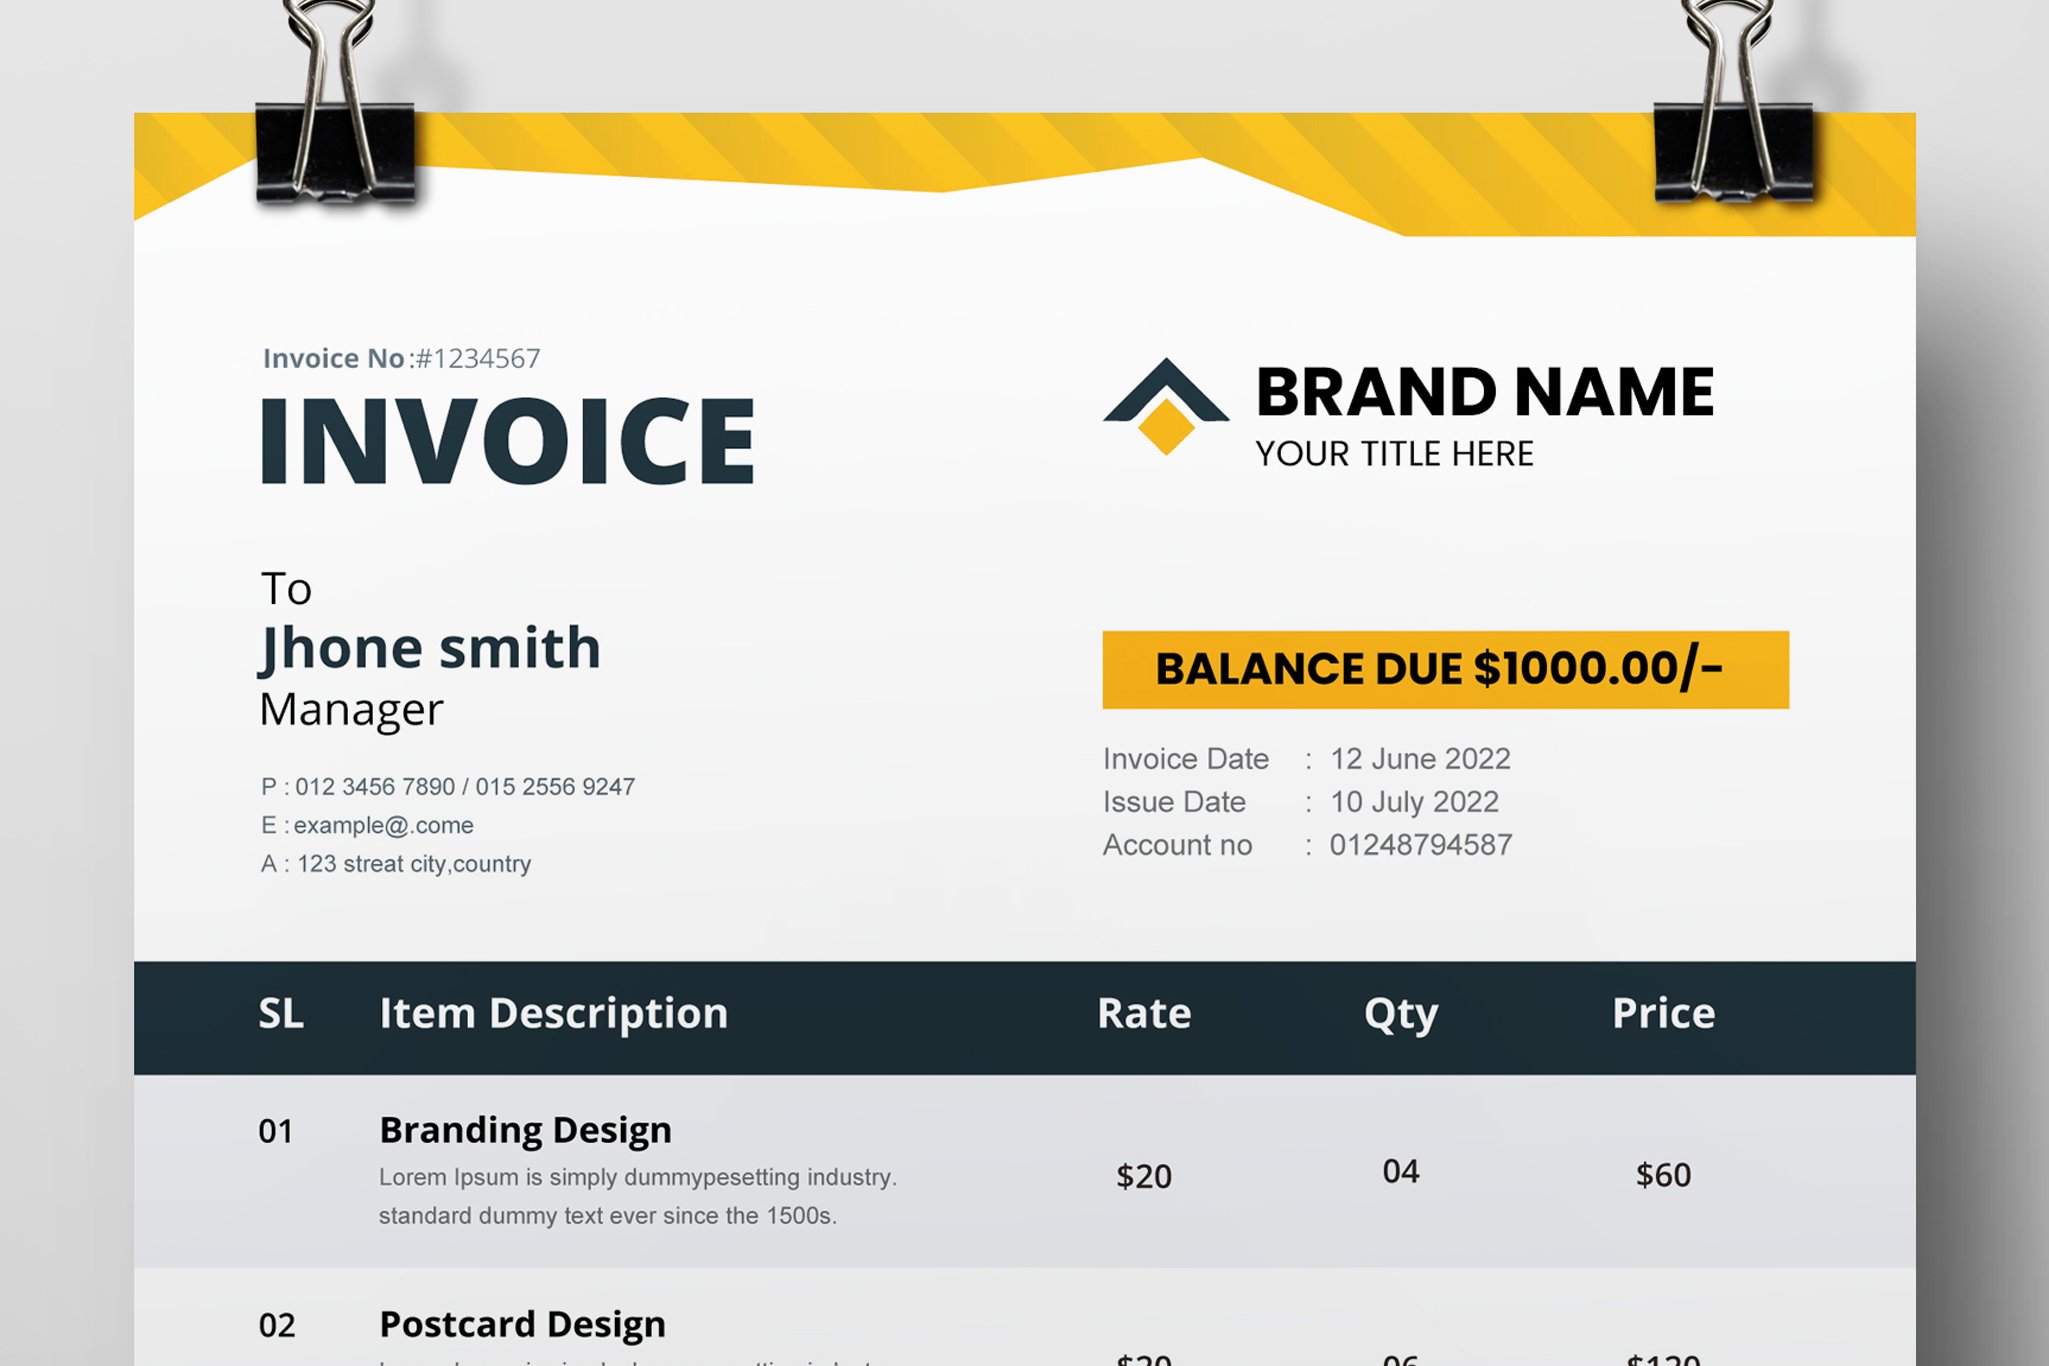 Invoice 2023 preview image.